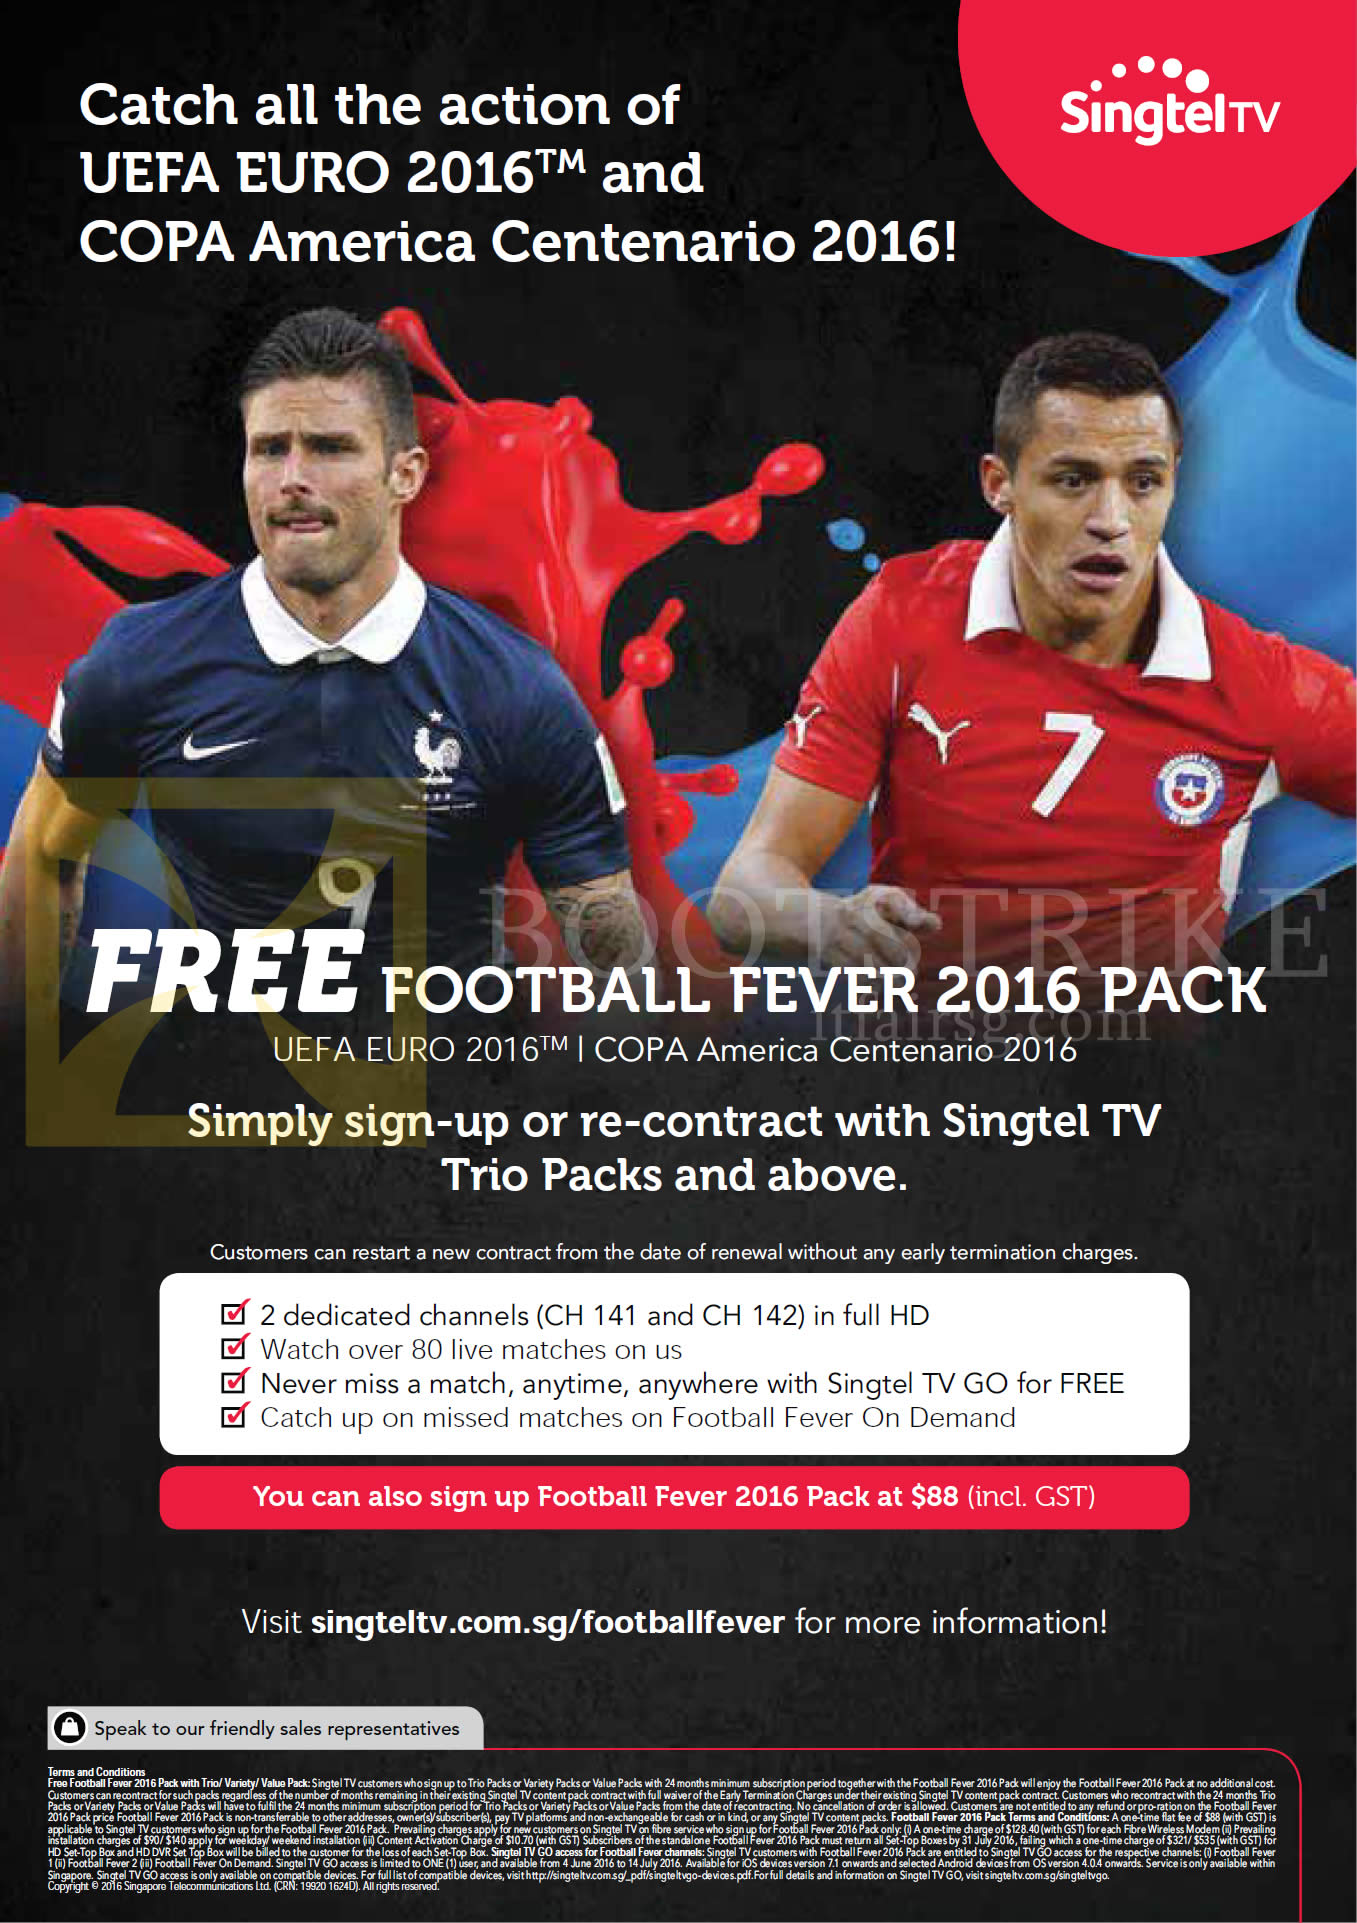 PC SHOW 2016 price list image brochure of Singtel TV Free Football Fever 2016 Pack